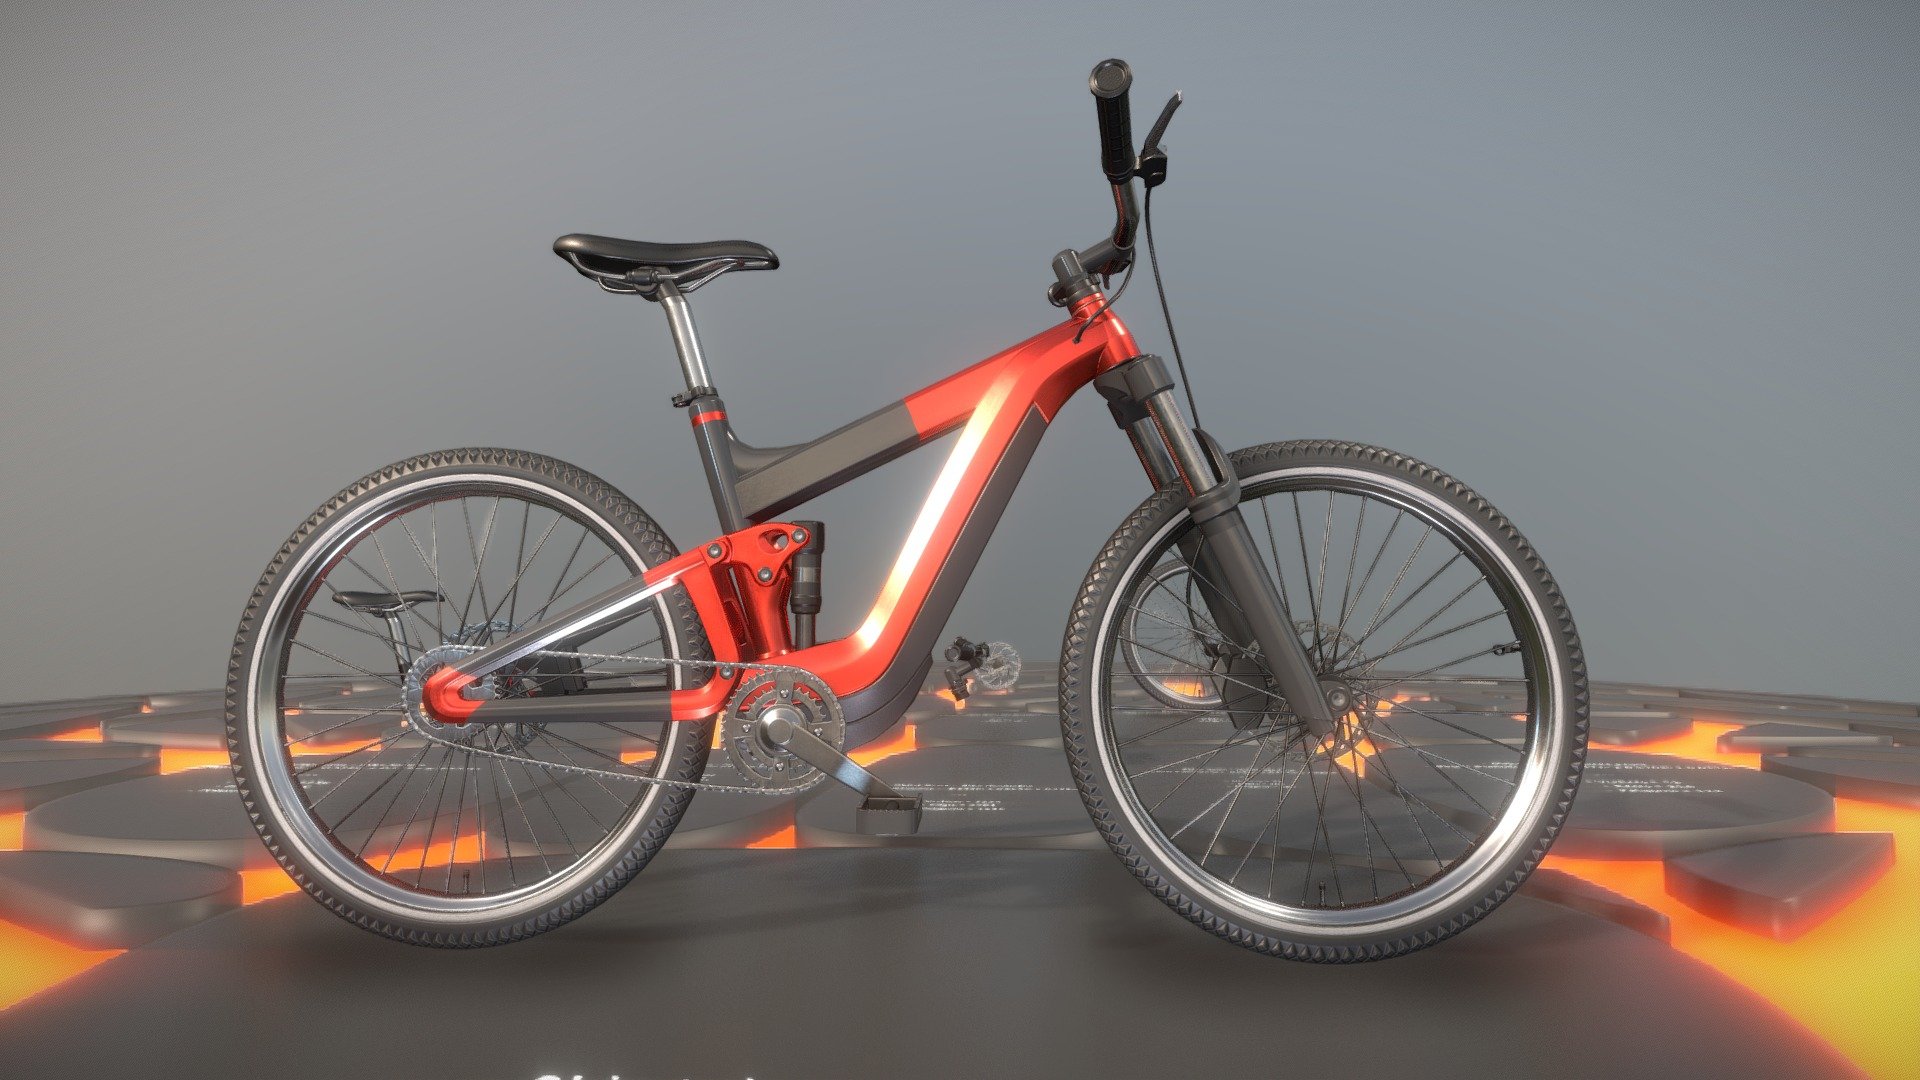 The red version of the low-poly e-bike.




Demo-Video (Blender-2.92)

Parts:



E_Bike 
1.968m x 0.663m x 1.108m
Vertices = 14005
Polygons = 18517



Pedal 
0.075m x 0.120m x 0.029m
Polygons = 483



Handlebar_Grip 
0.048m x 0.171m x 0.056m
Polygons = 108



Disc_Brake_Pads 
0.208m x 0.004m x 0.208m
Polygons = 1703



Chain_Part_2 
0.019m x 0.004m x 0.007m
Polygons = 36



Chain_Part_1 
0.019m x 0.006m x 0.007m
Polygons = 72



Brake_Lever 
0.097m x 0.170m x 0.037m
Polygons = 128



Bike_Wheel 
0.742m x 0.107m x 0.737m
Polygons = 1695




Bike_Handlebar 
0.143m x 0.663m x 0.192m
Polygons = 1695



Bike_Chain_Lowpoly 
0.634m x 0.013m x 0.204m
Polygons = 144
 - E-Bike Red - Buy Royalty Free 3D model by VIS-All-3D (@VIS-All) 3d model